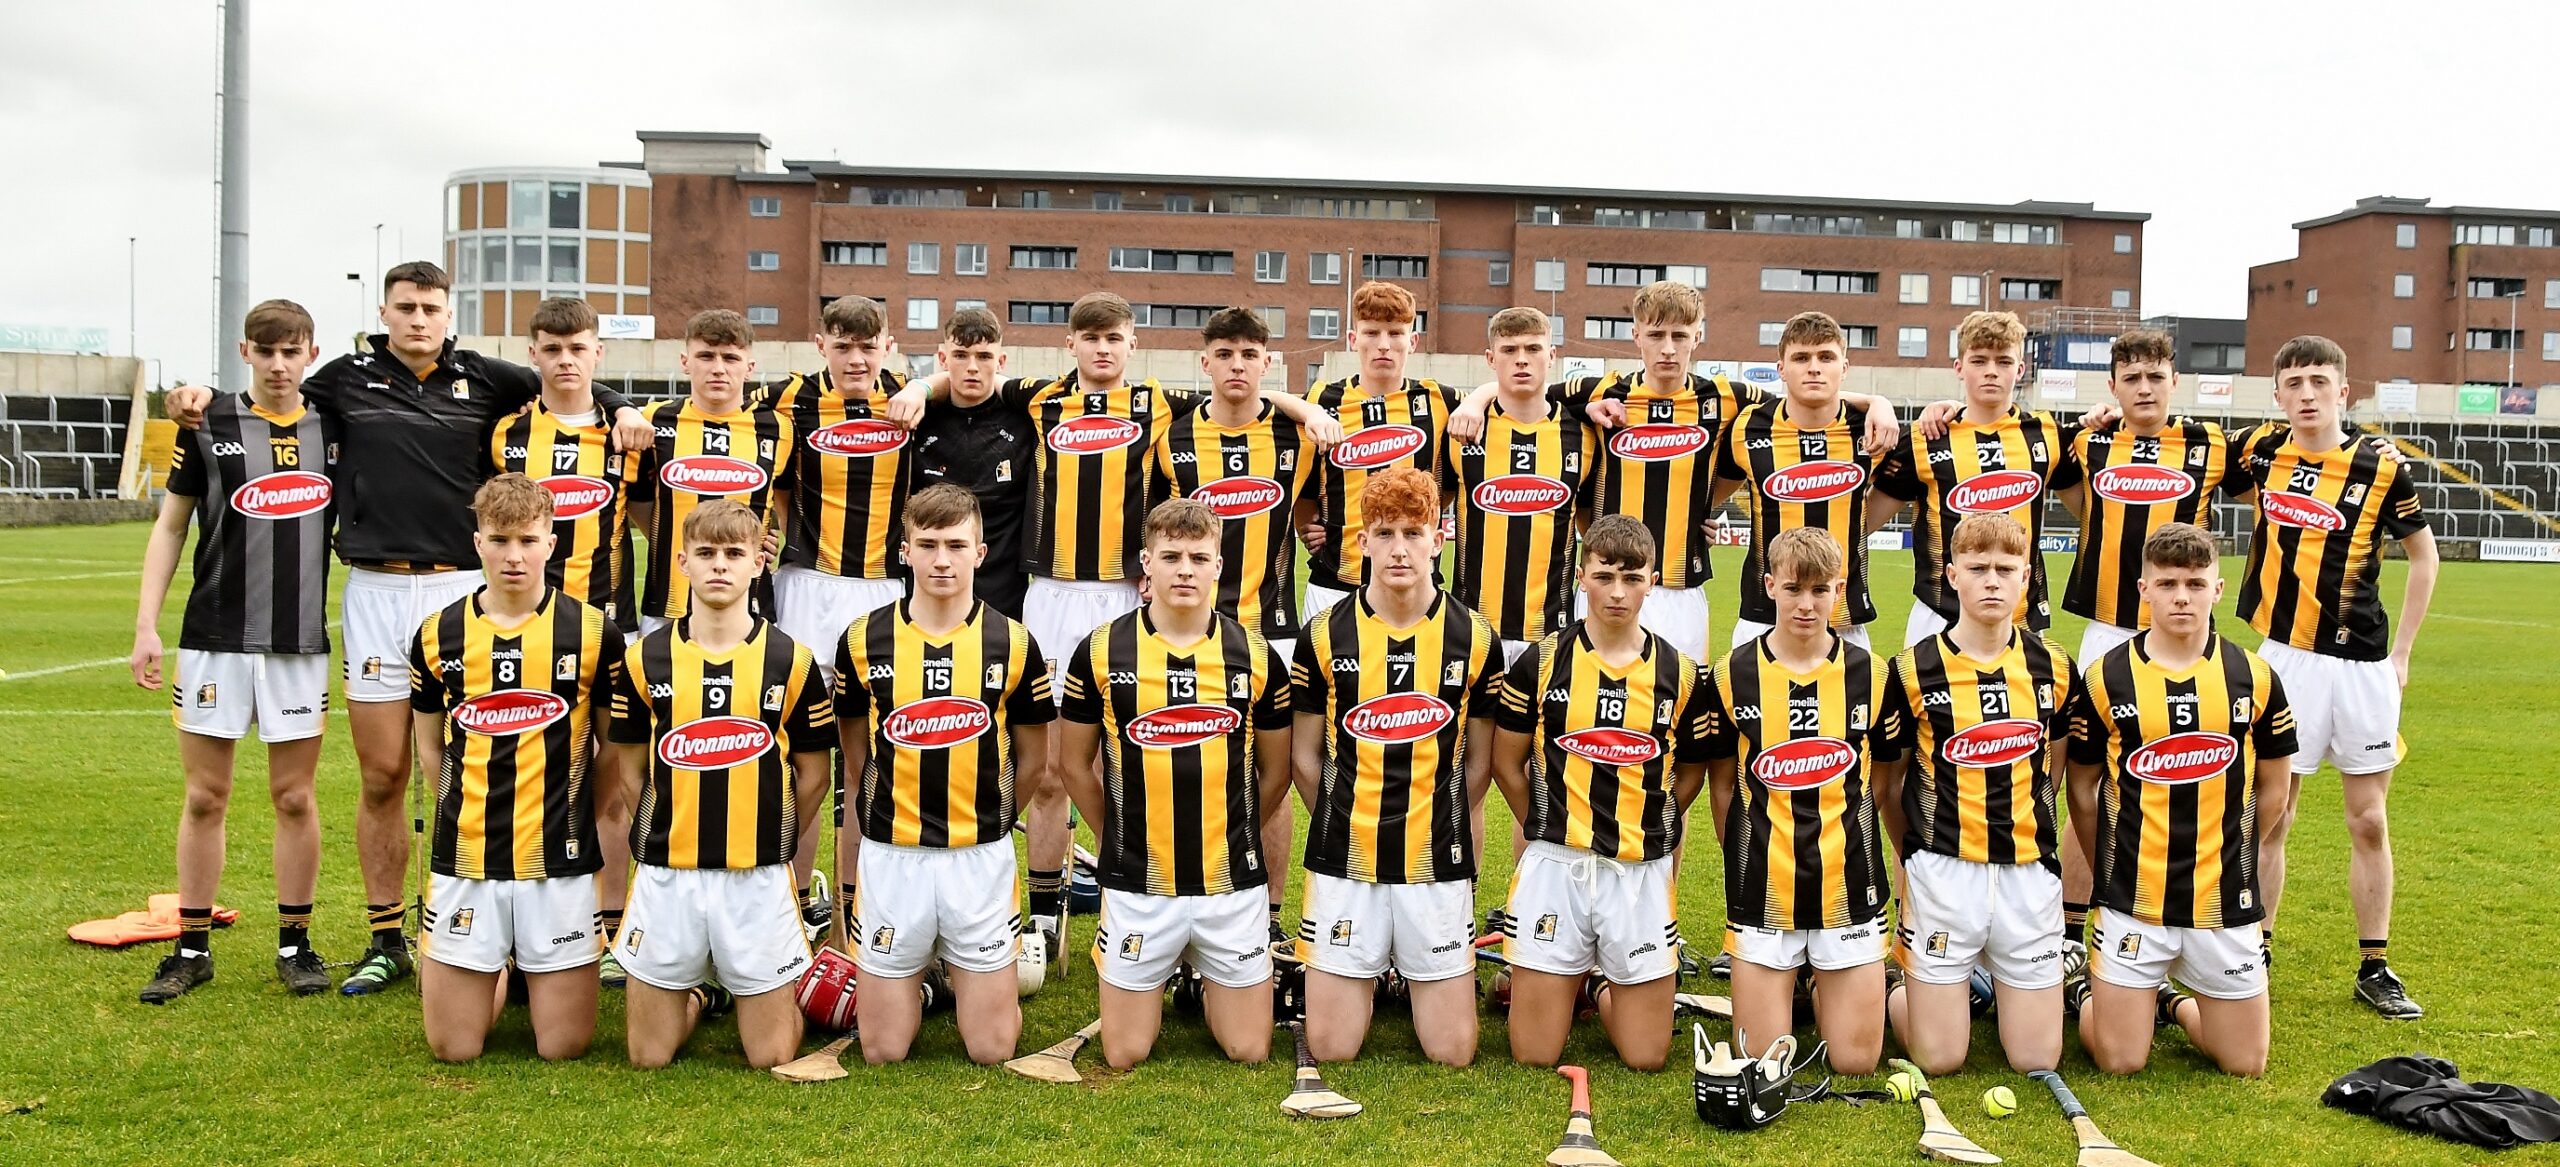 Kilkenny minors off to winning ways in opening round of the Electric Ireland Leinster MHC